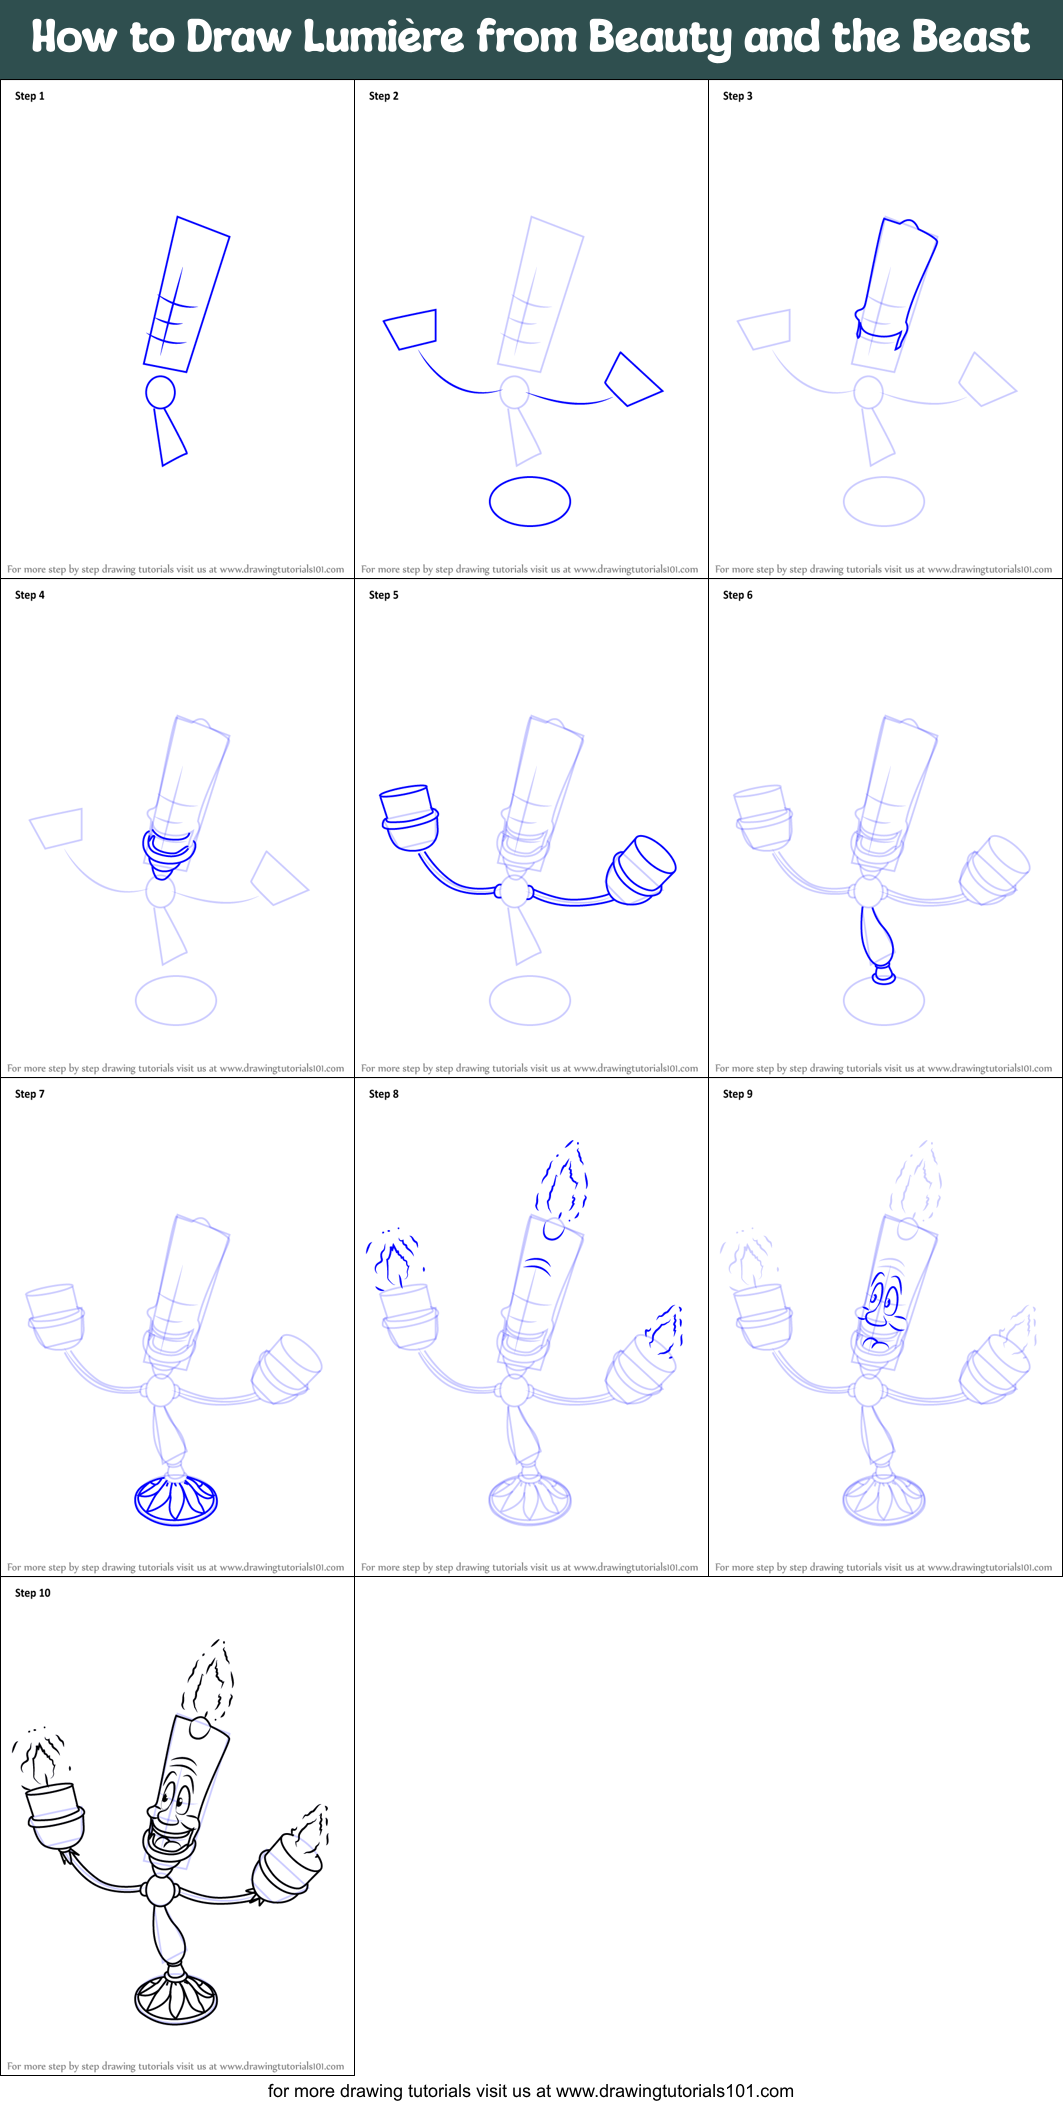 How to Draw Lumière from Beauty and the Beast printable step by step